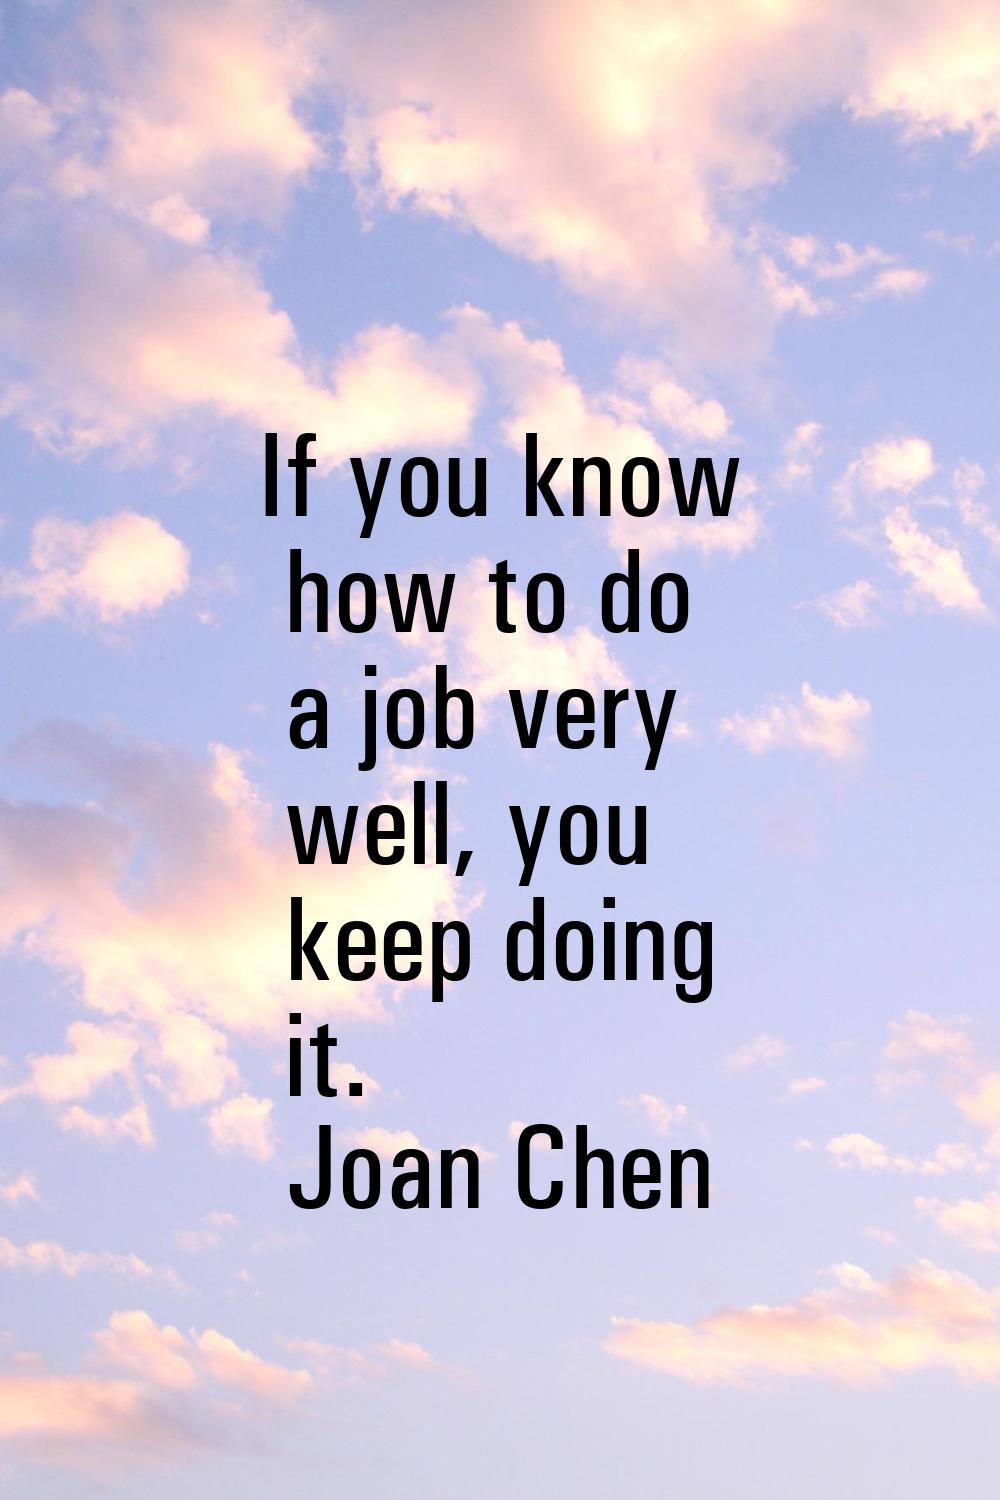 If you know how to do a job very well, you keep doing it.